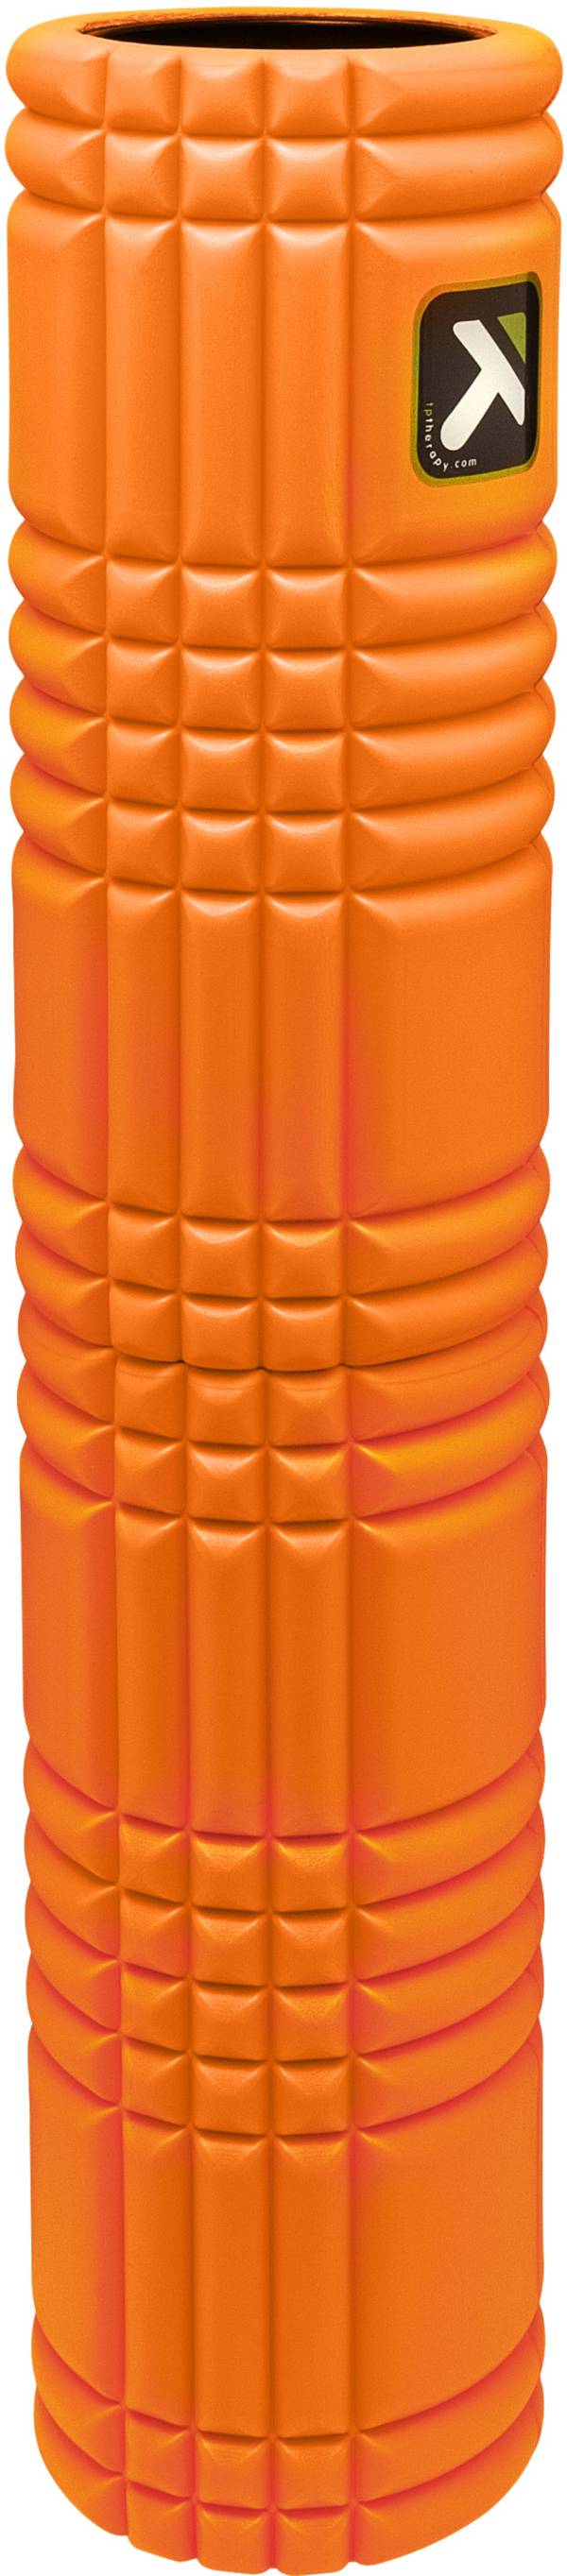 TriggerPoint GRID 2.0 Foam Roller product image